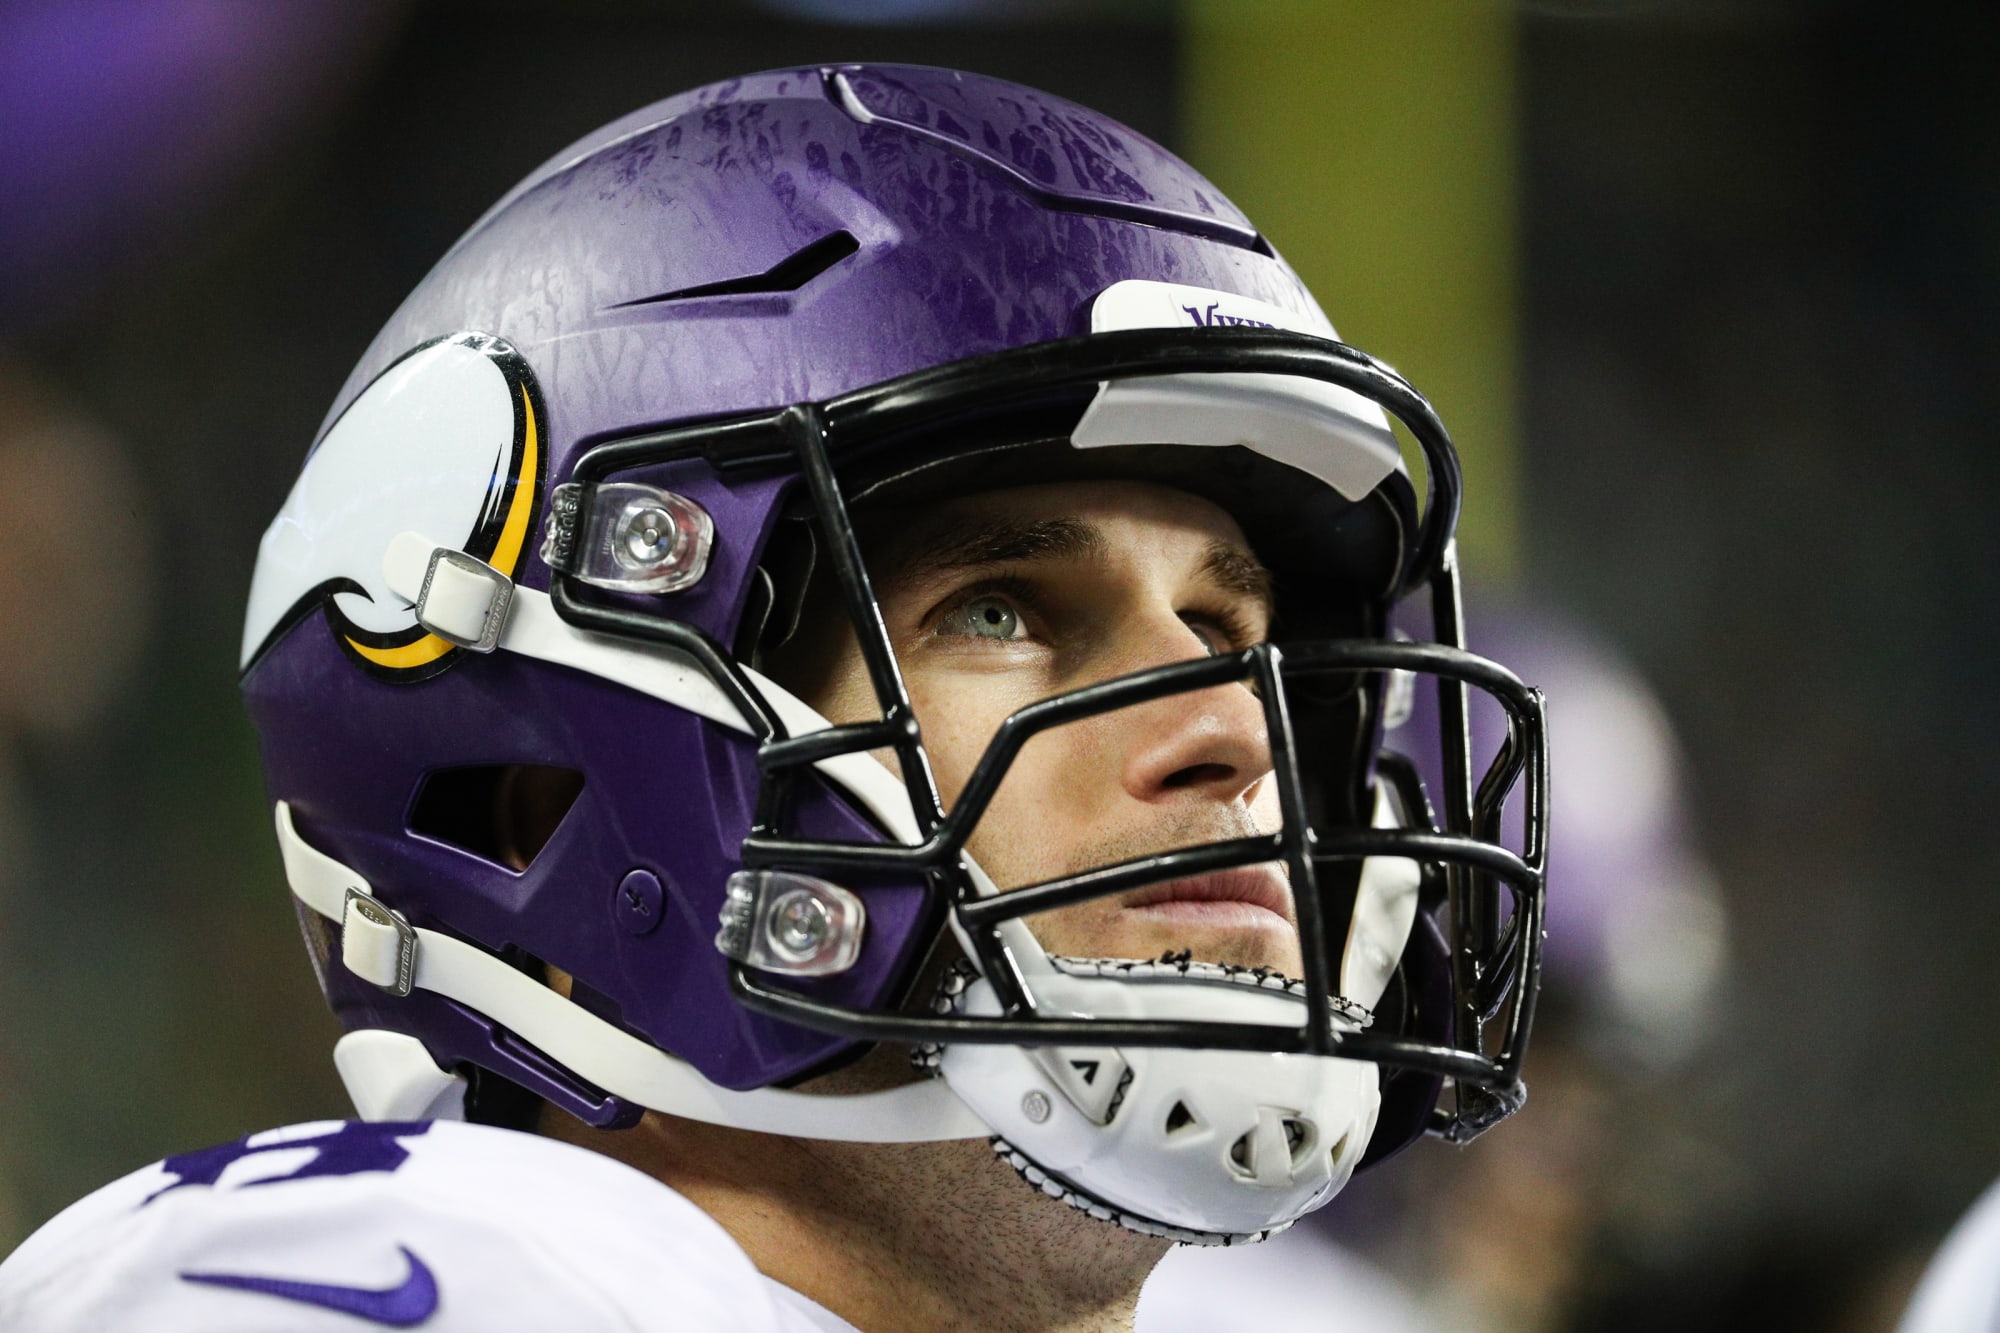 Cousins is the Vikings’ quarterback for the next two years, so get over it